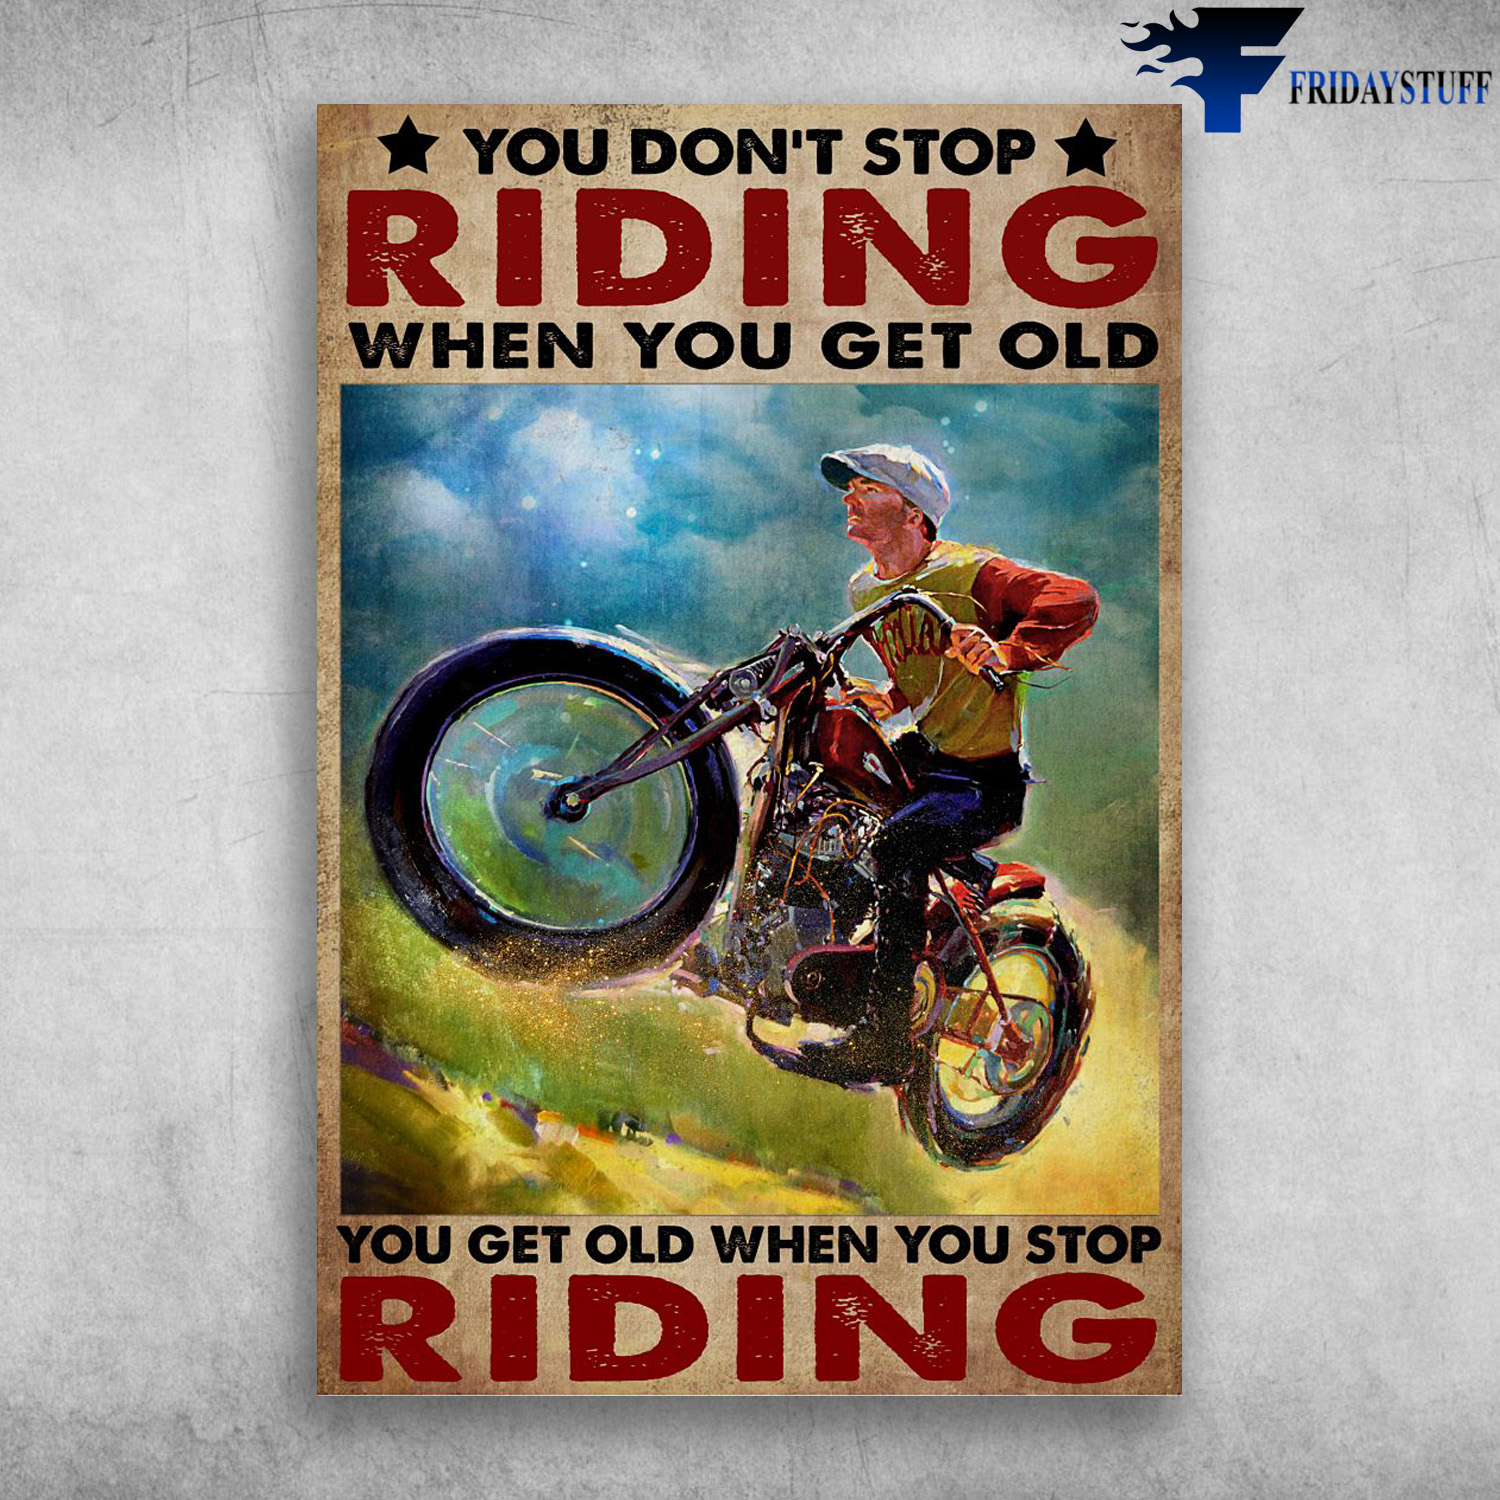 Man Riding Motorcycle - You Don't Stop Riding When You Get Old, You Get Old When You Stop Riding